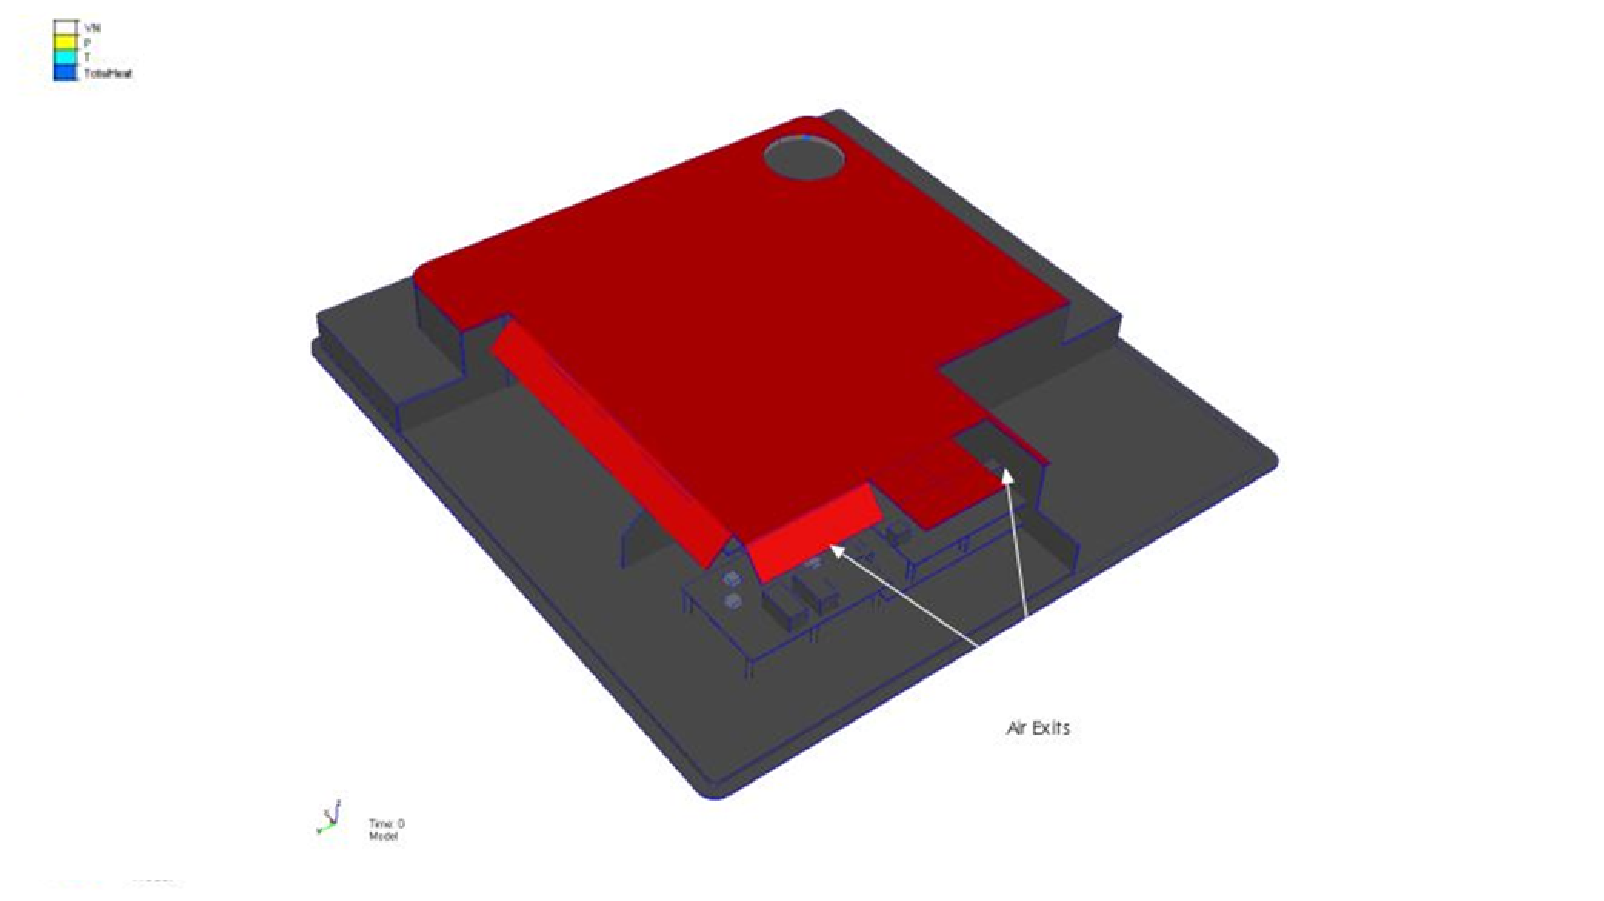 CFD simulation model of internal electronics assembly with thermal flow shield and chips and printed circuit boards (PCB)